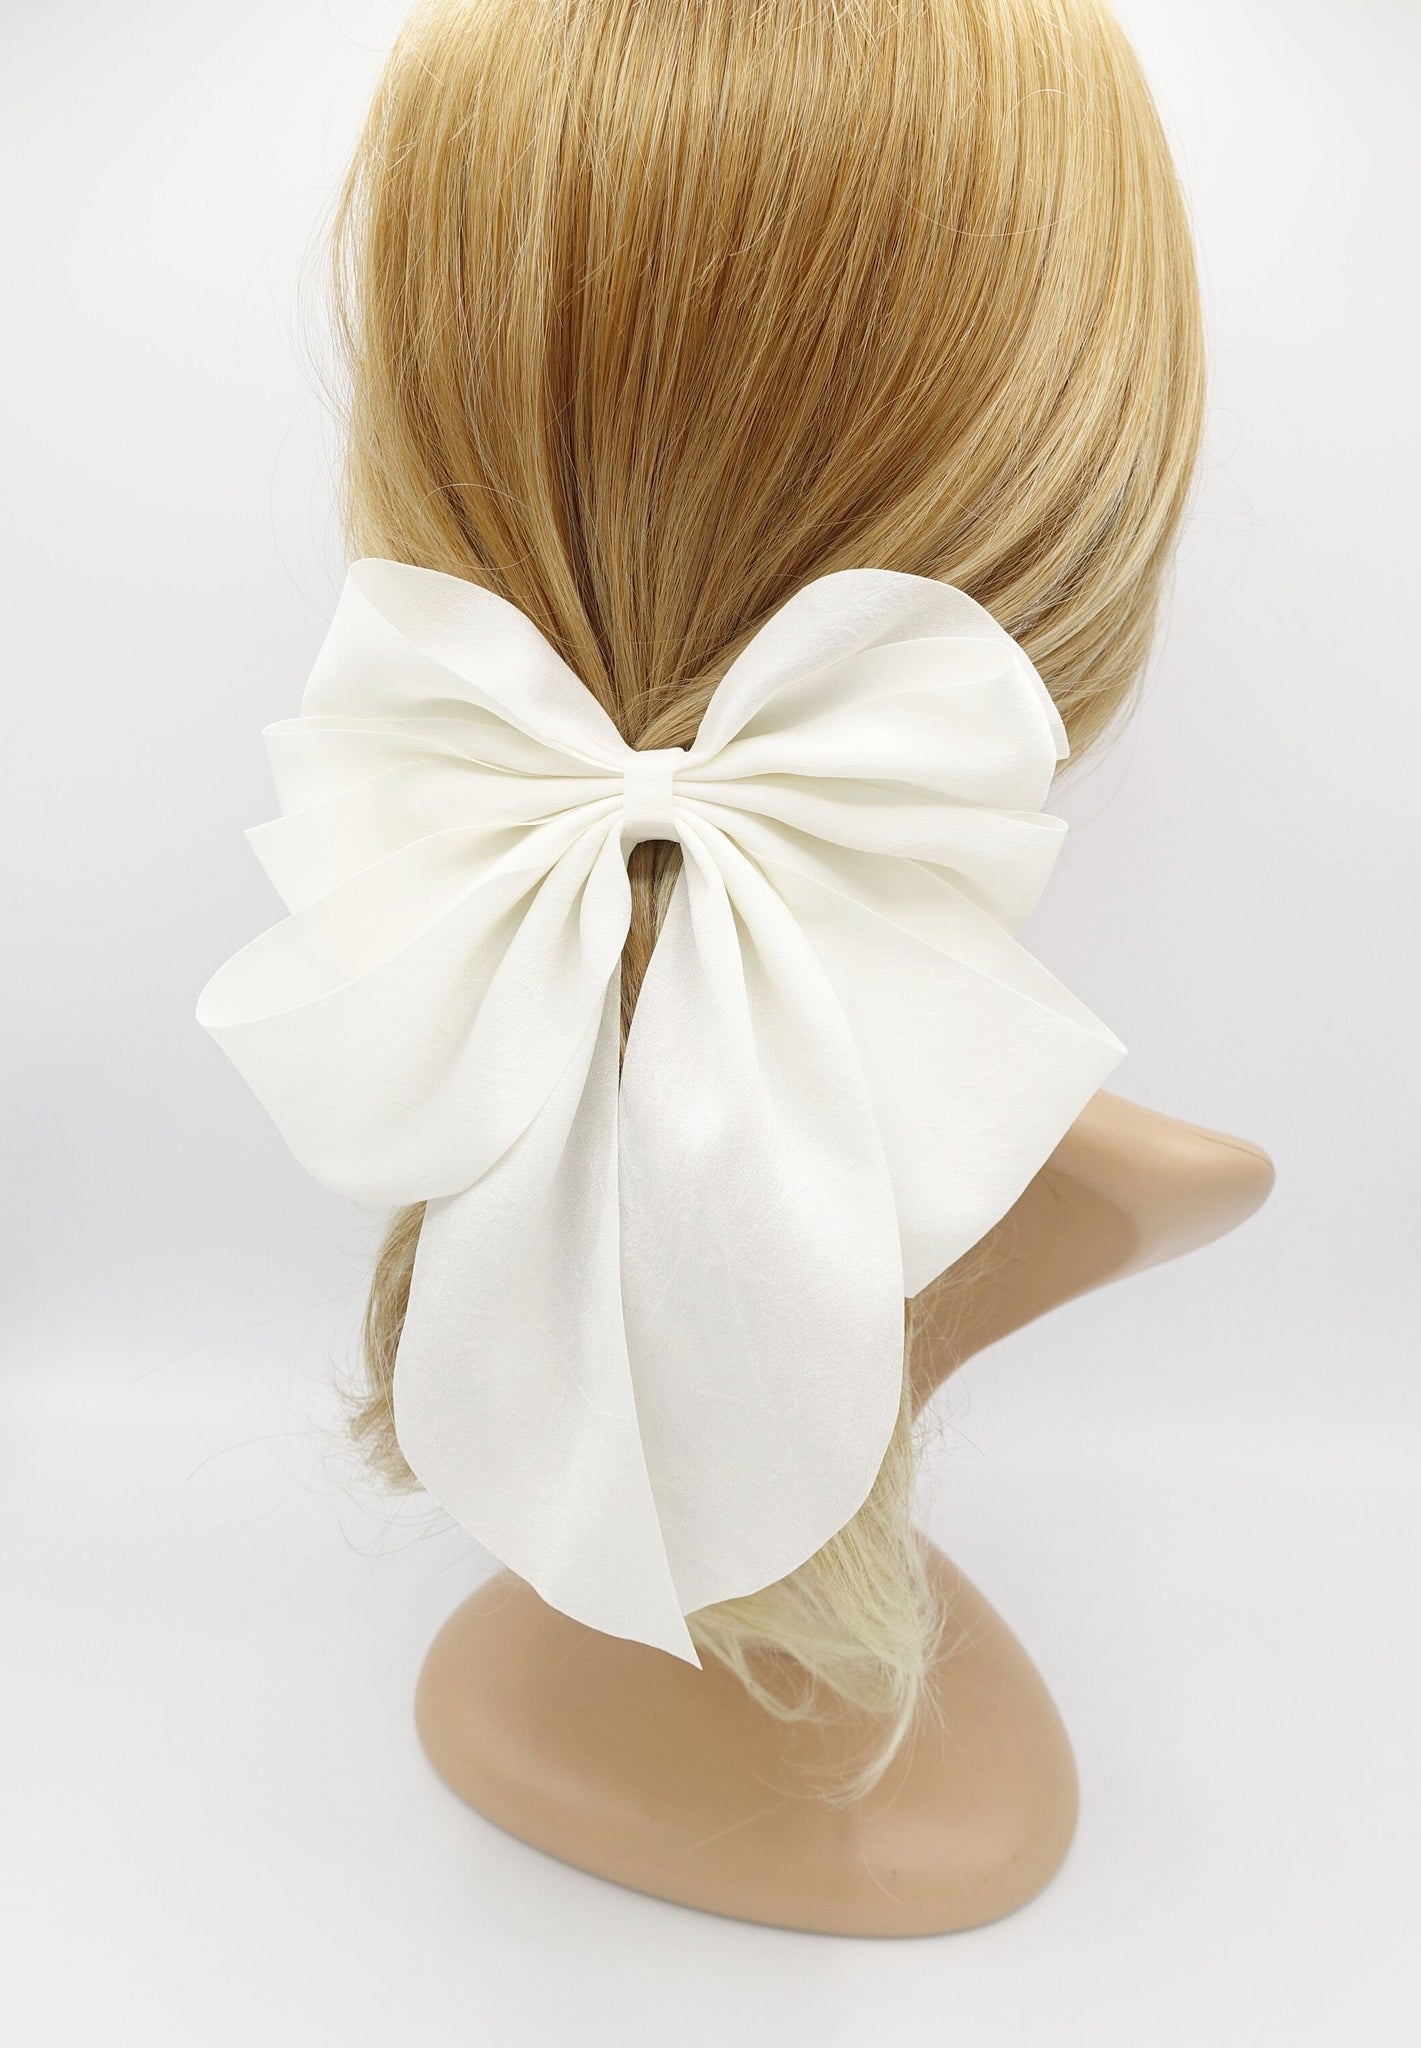 veryshine.com Barrette (Bow) Cream white multiple layered tail hair bow crinkled fabric pleated bow hair accessory for women